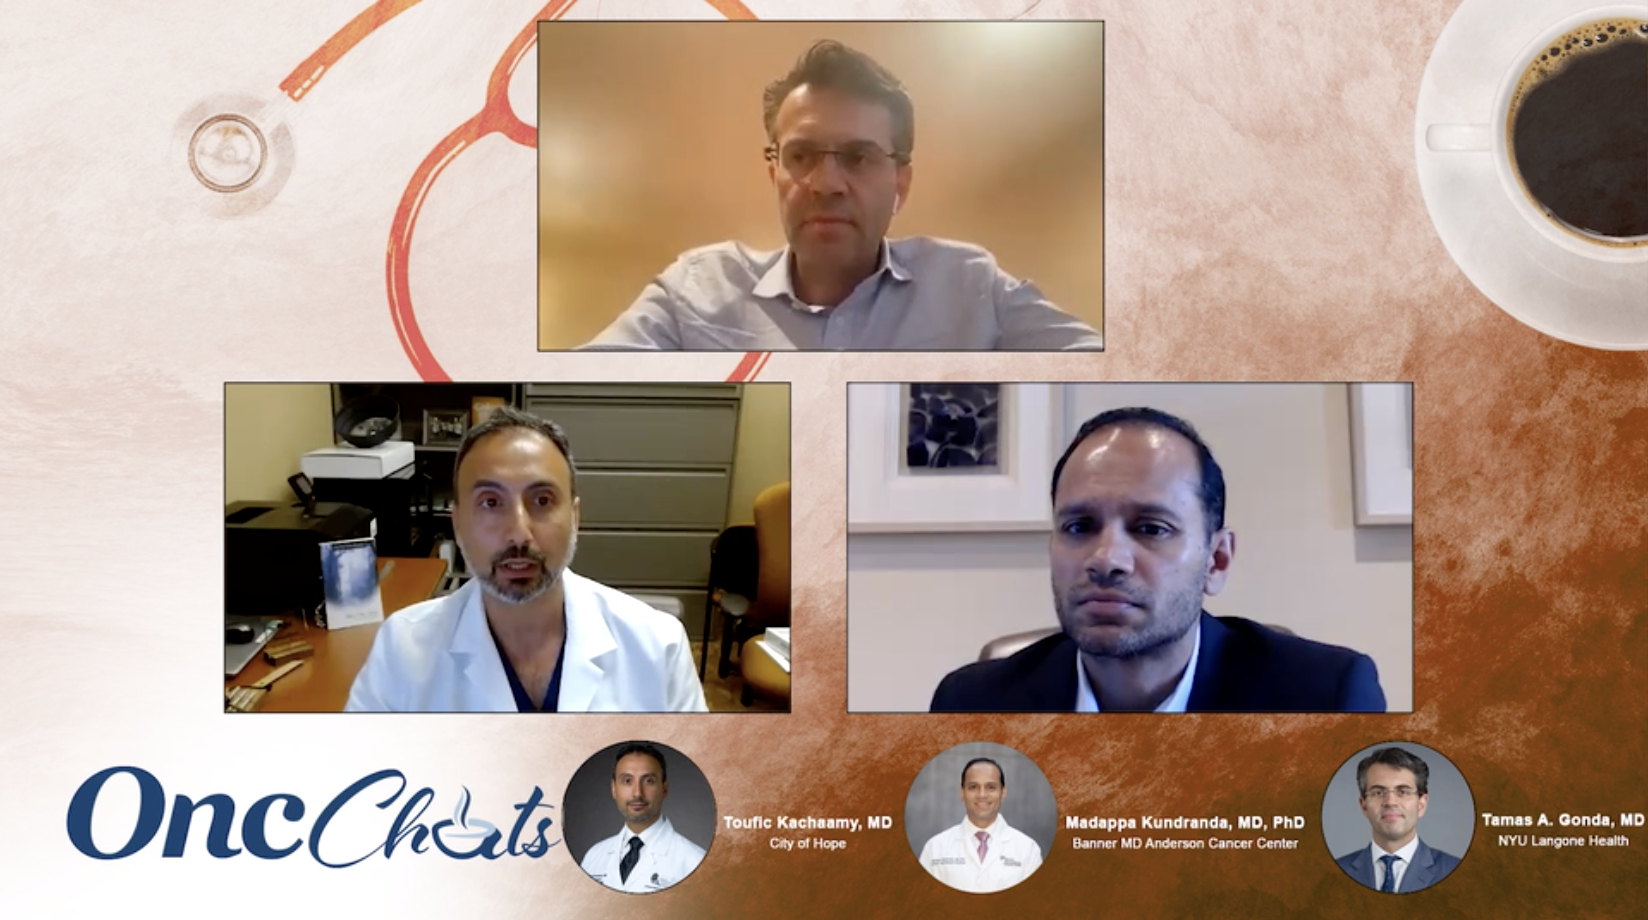 In this third episode of OncChats: Leveraging Endoscopic Ultrasound in Pancreatic Cancer, Toufic A. Kachaamy, MD, Madappa Kundranda, MD, PhD, and Tamas A. Gonda, MD, share how they would best utilize genetic testing results obtained from endoscopic ultrasound–guided biopsies in pancreatic ductal adenocarcinomas.